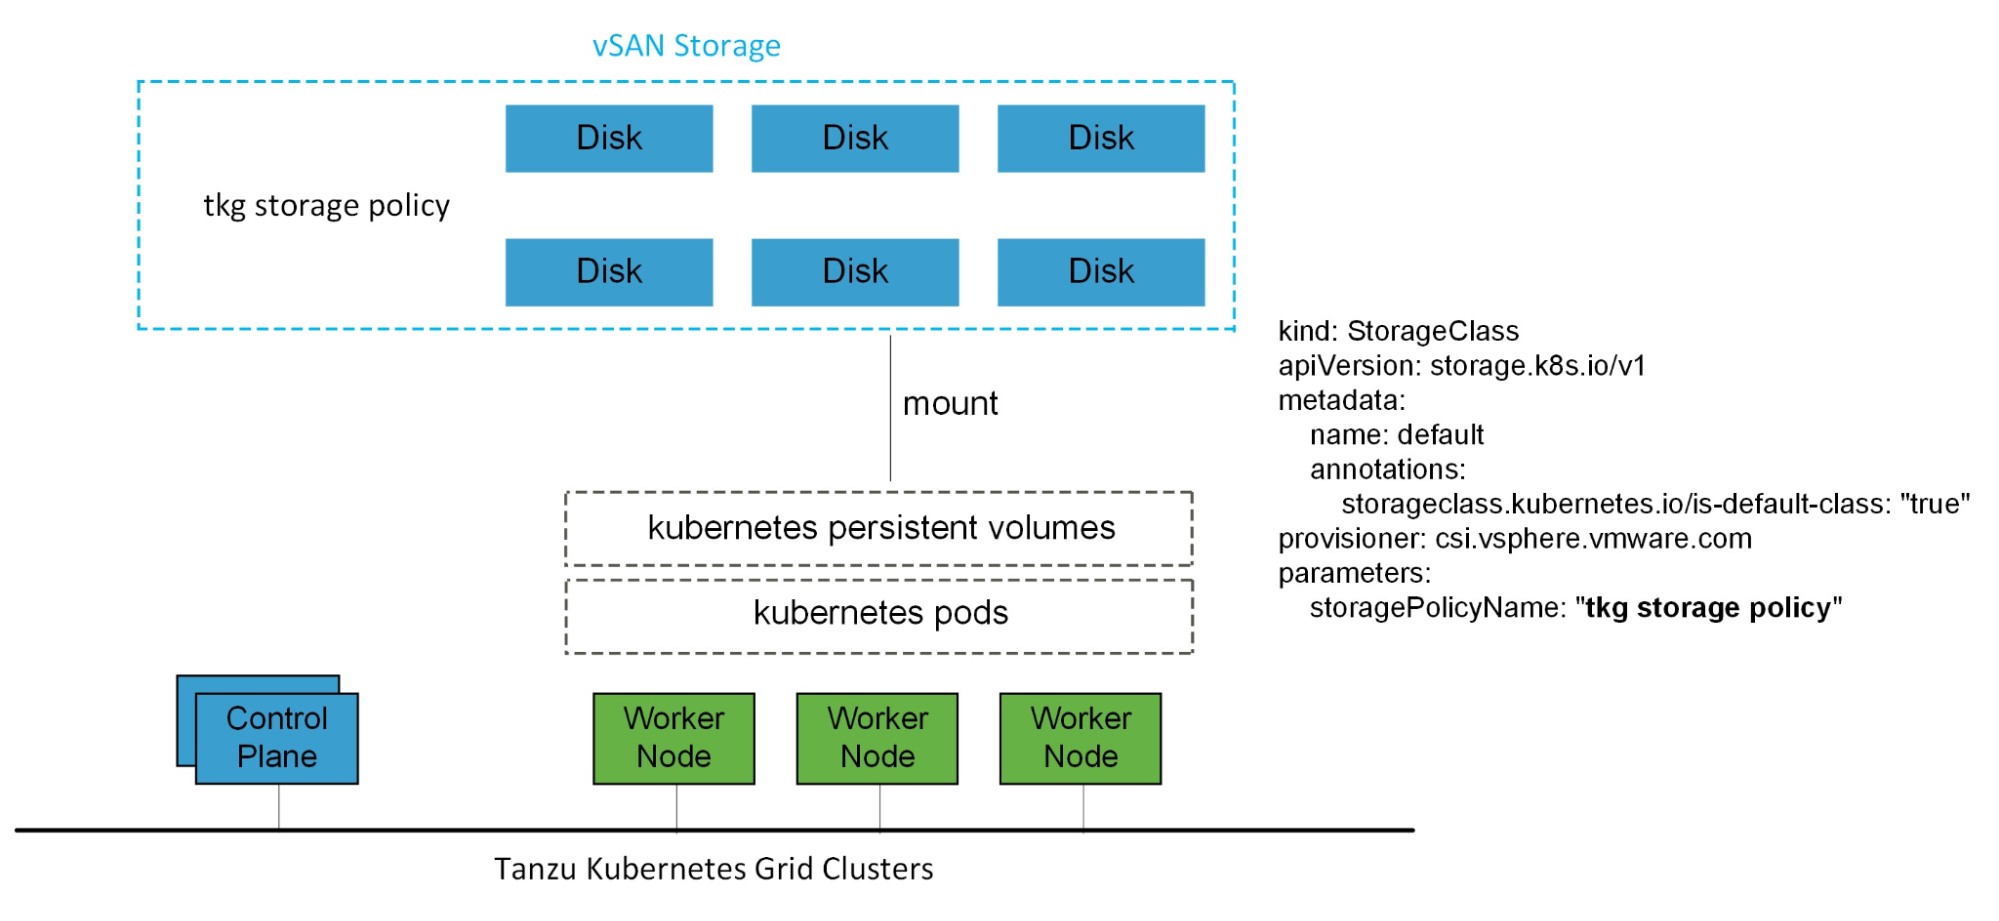 TKG Storage integration example with vSAN